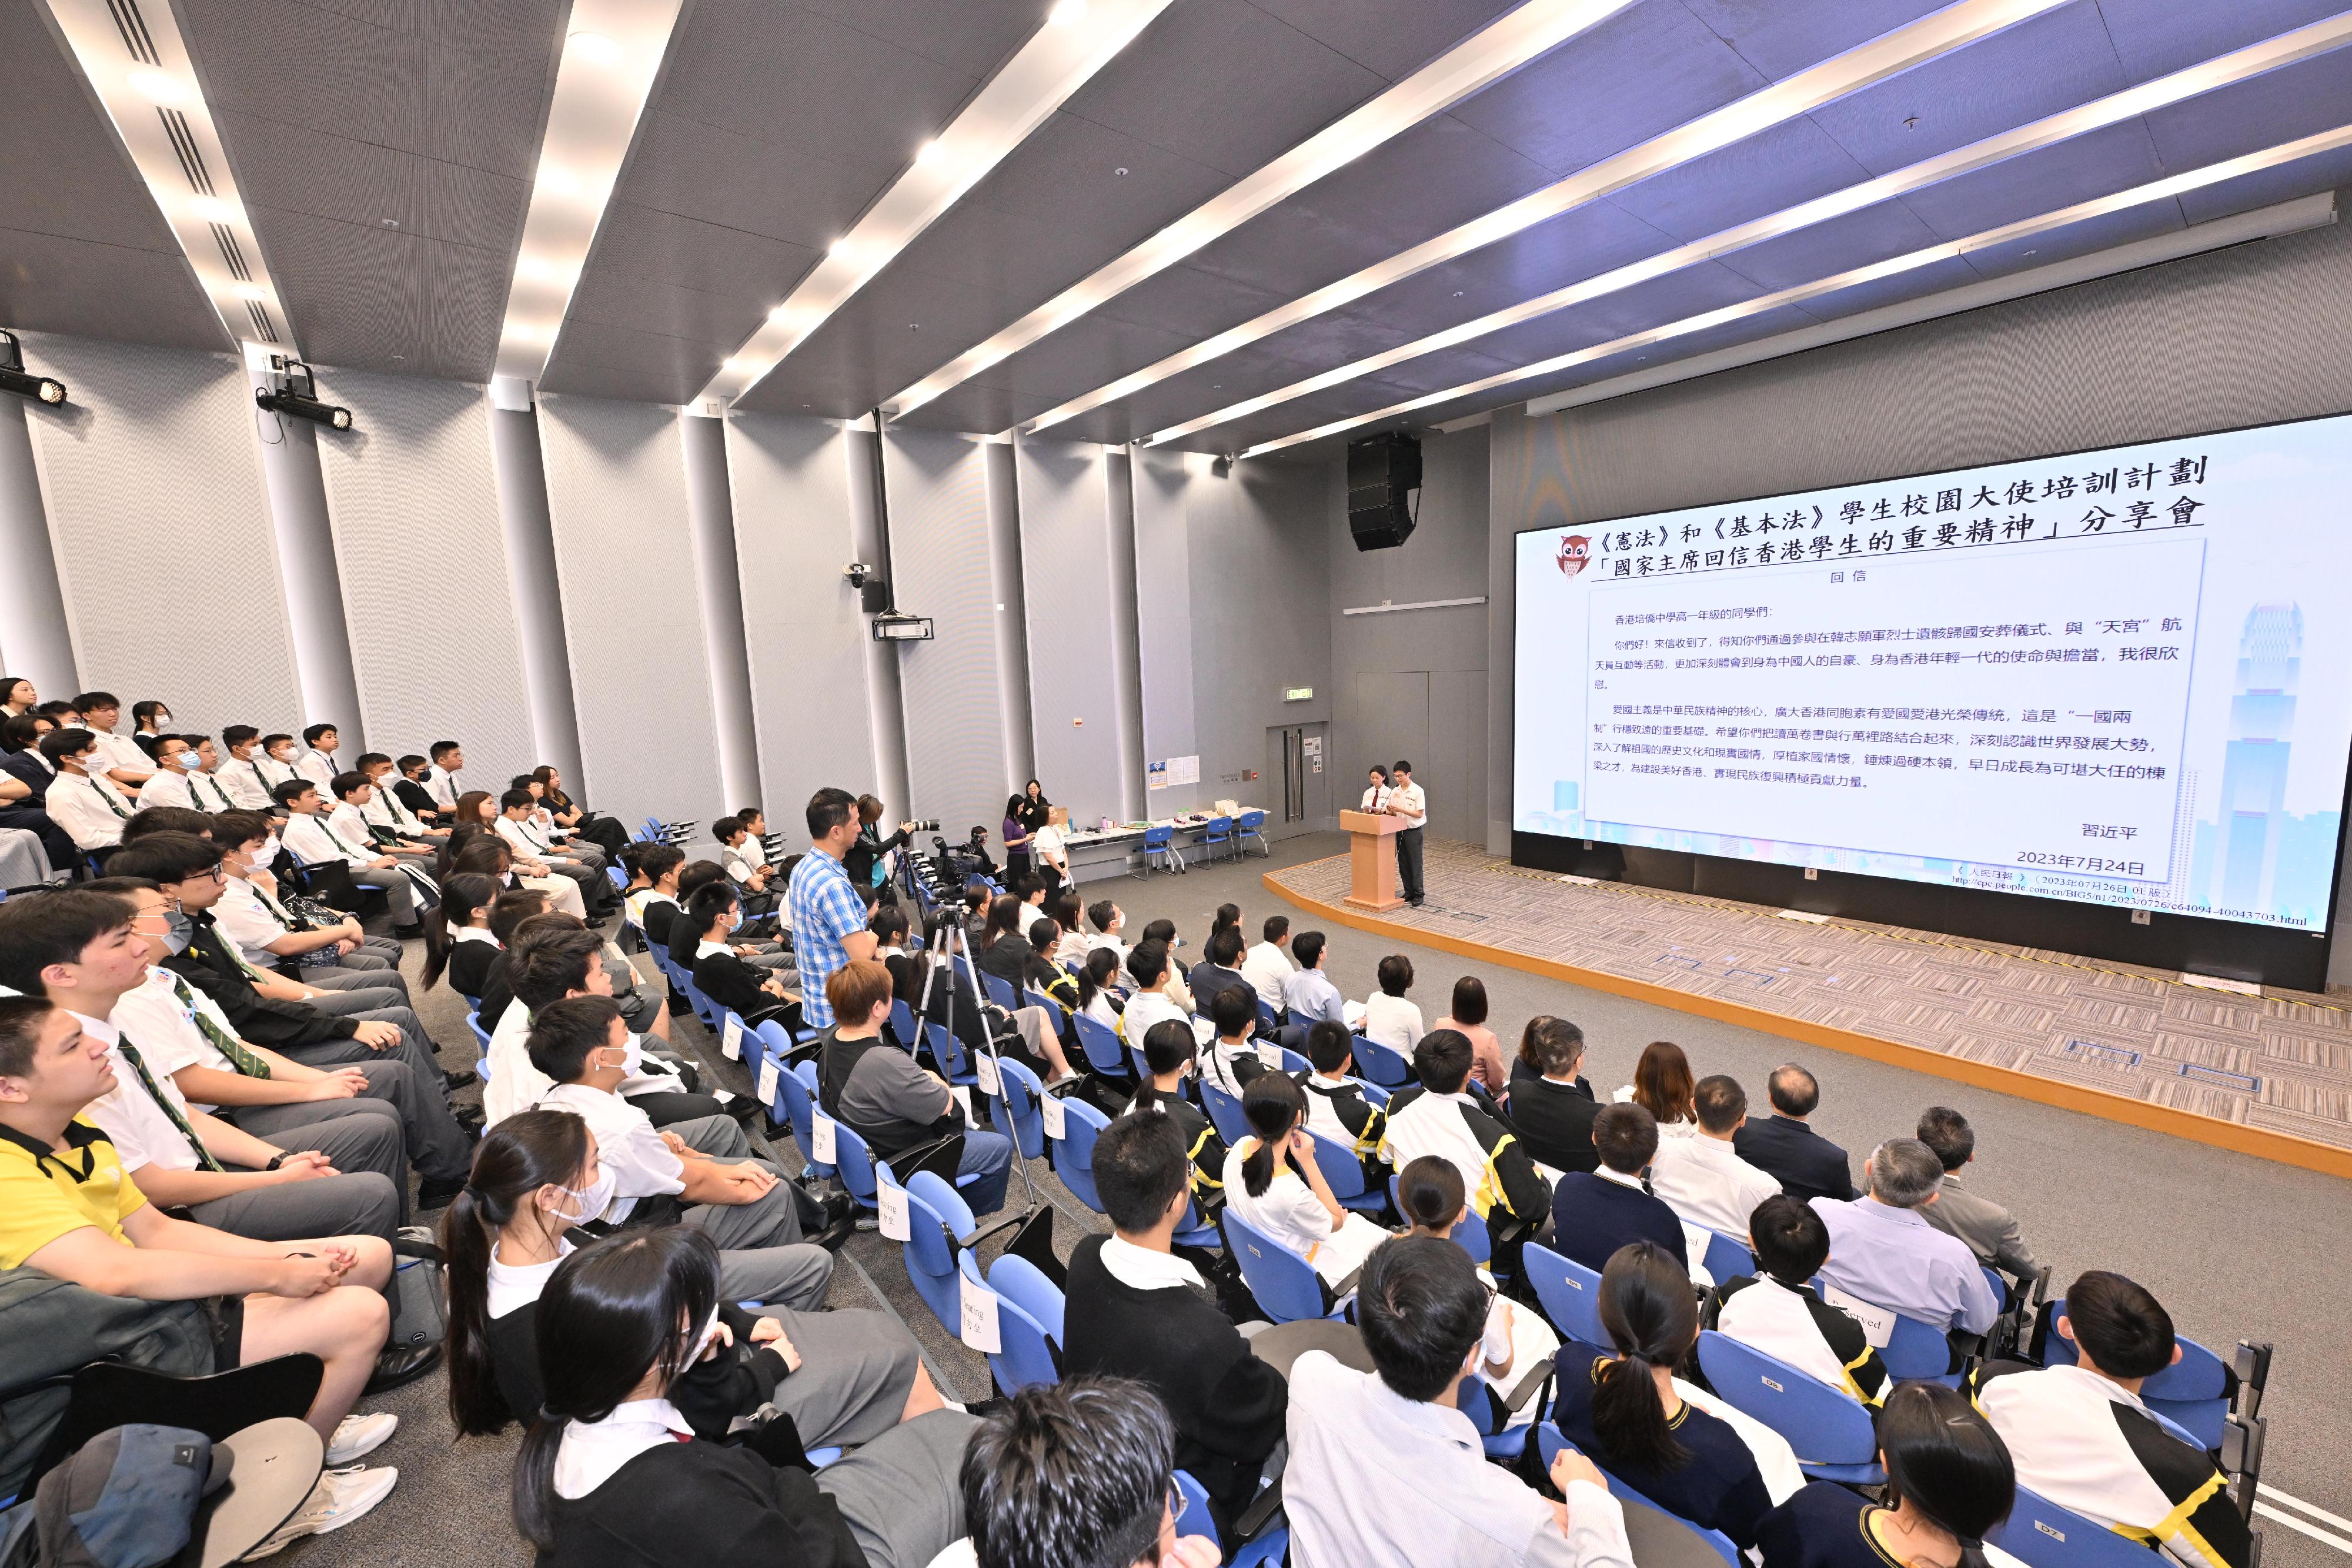 The Education Bureau today (October 28) held a sharing session on the "Important spirit of President Xi Jinping's reply letter to Hong Kong students", attended by over 200 participants, including secondary and primary school principals, teachers and Constitution and Basic Law Student Ambassadors from secondary schools.